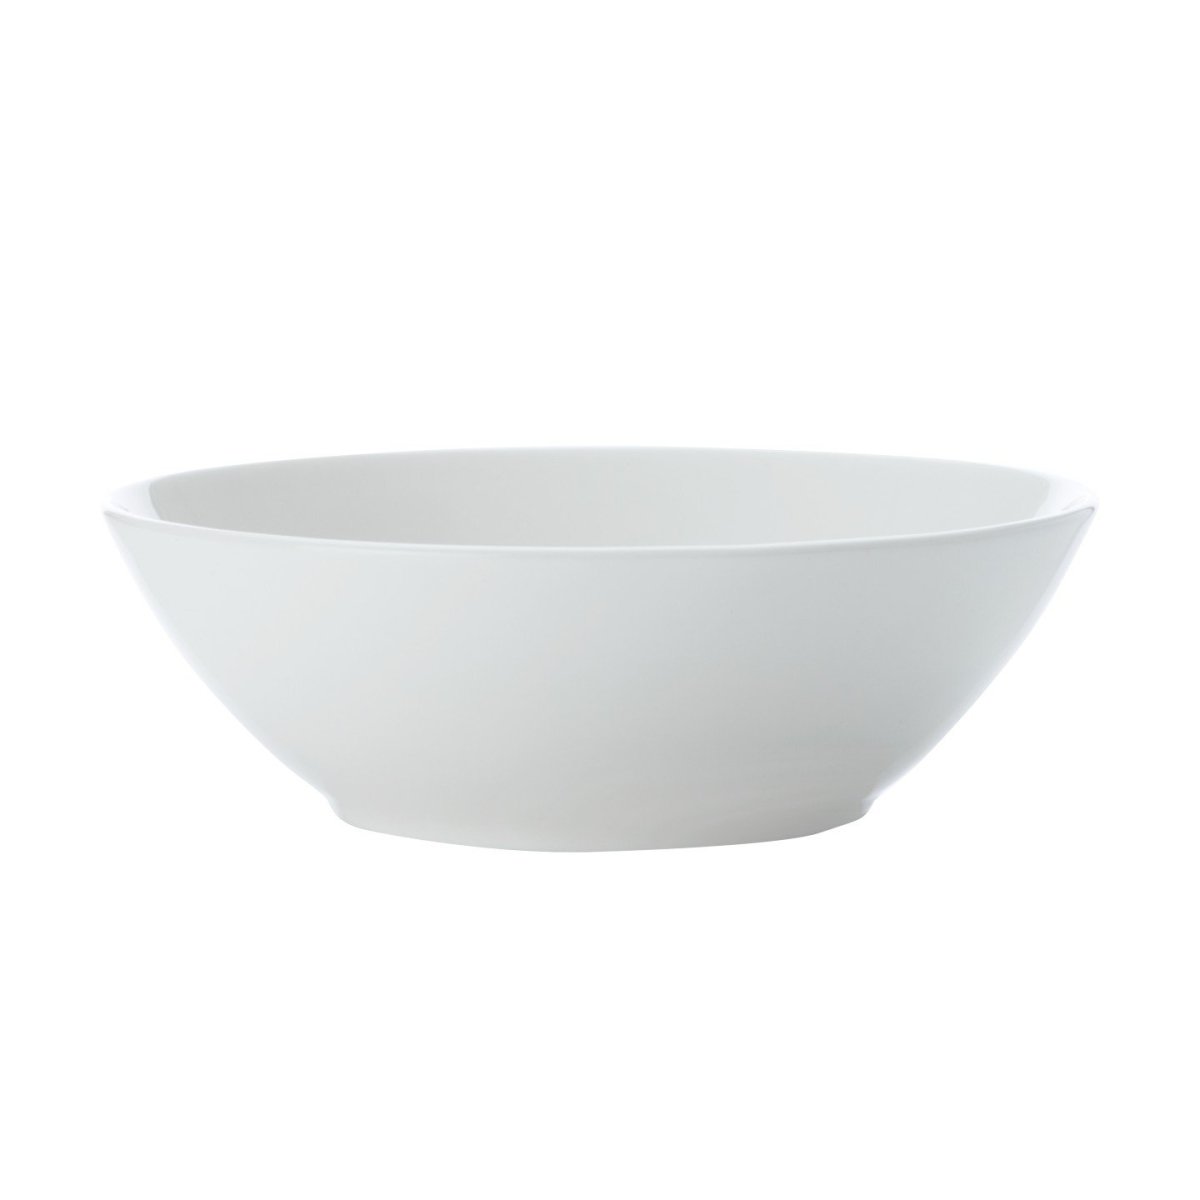 Cashmere Coupe 15cm Cereal Bowl - Minimax